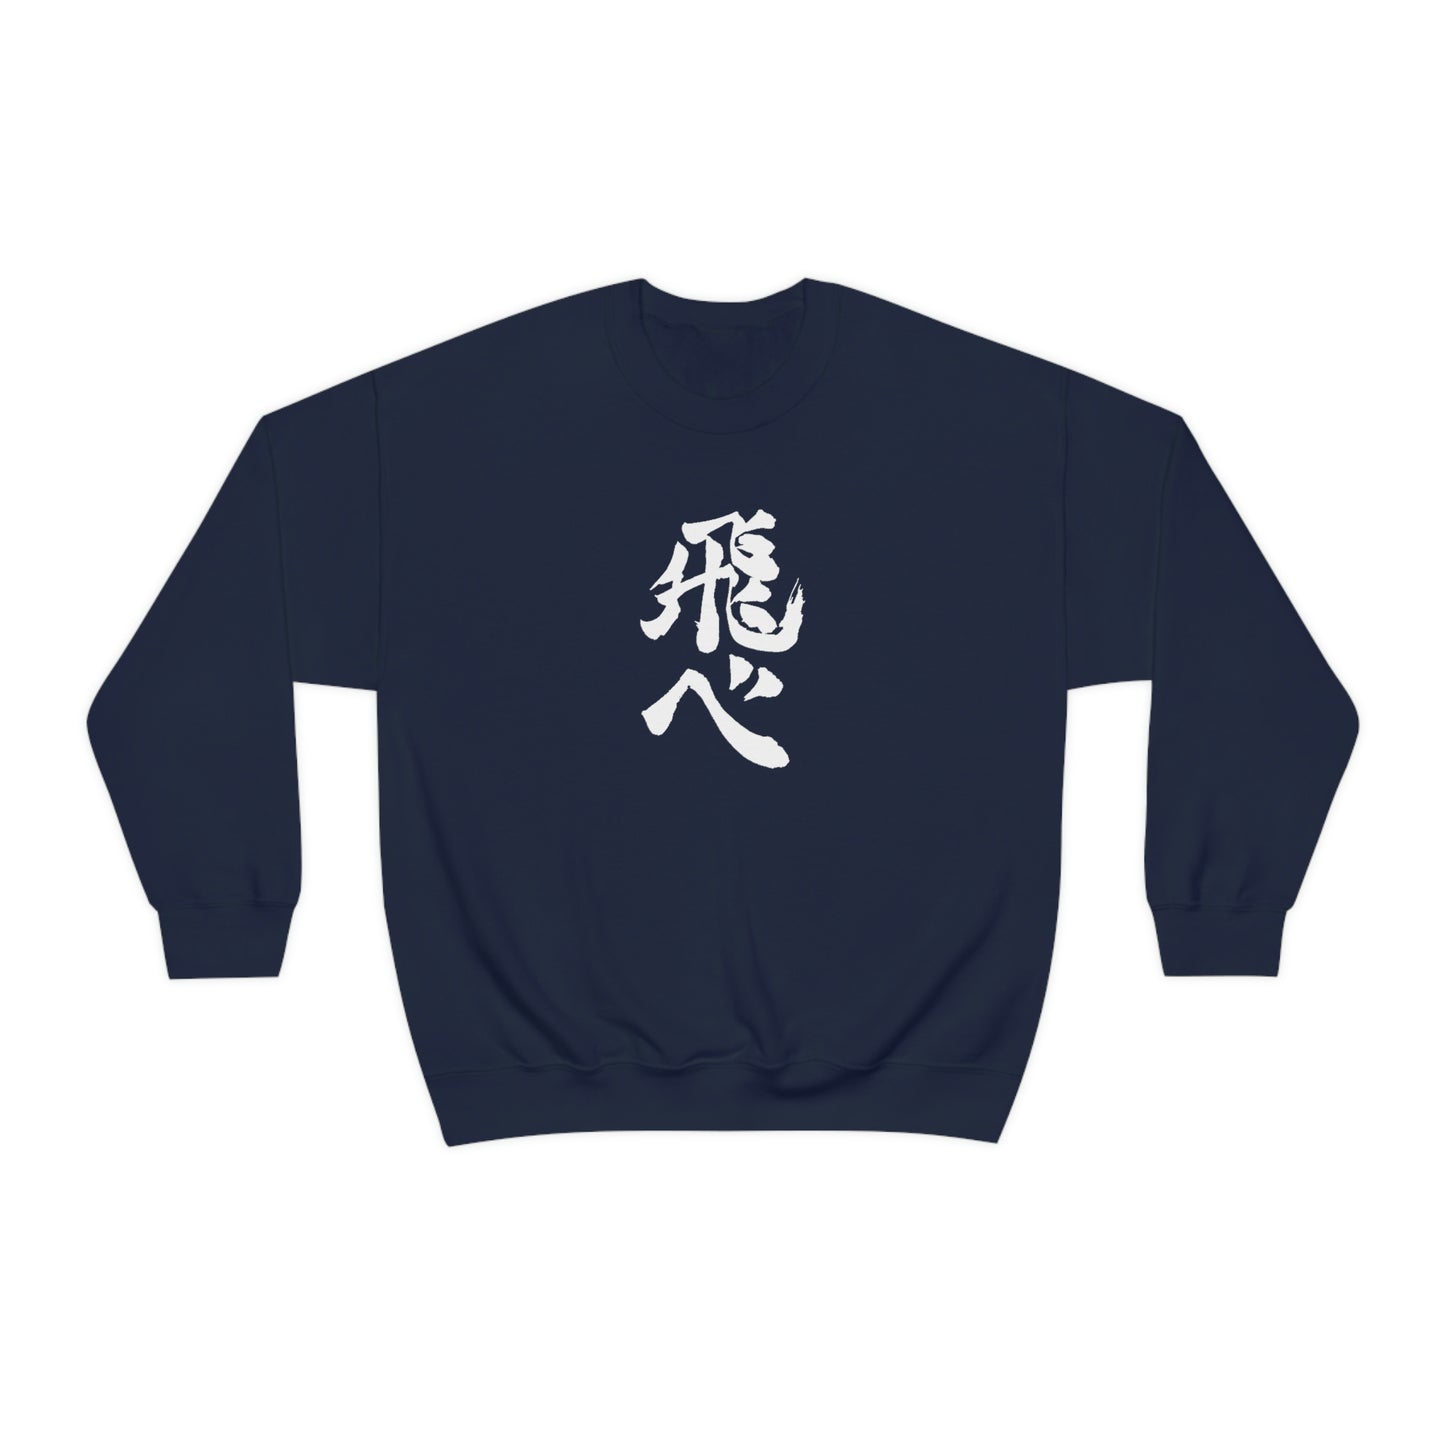 FLY sweatshirt Volleyball Club Fly shirt High Volleyball club sweater pullover jumper